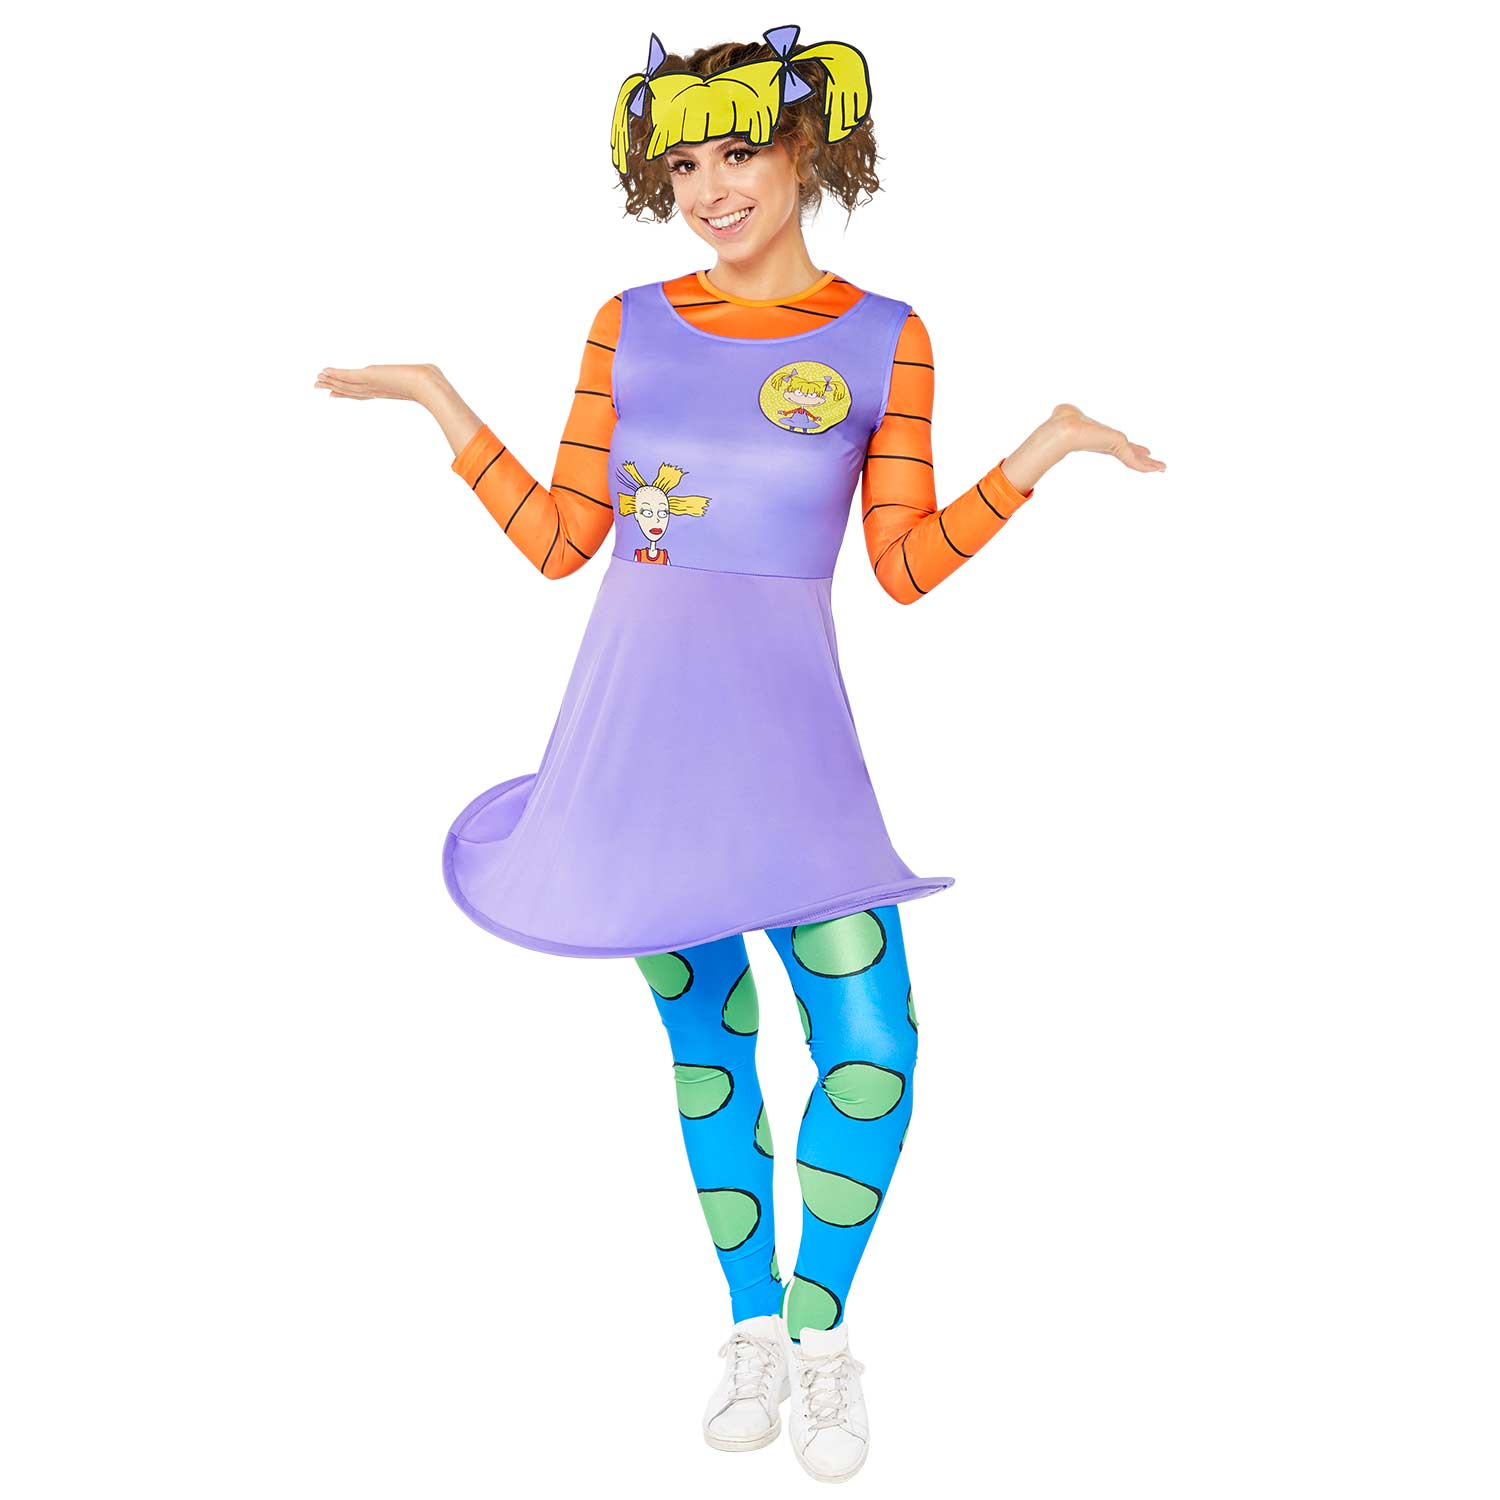 Rugrats Angelica Costume - Size 14-16 - 1 PC : Amscan International